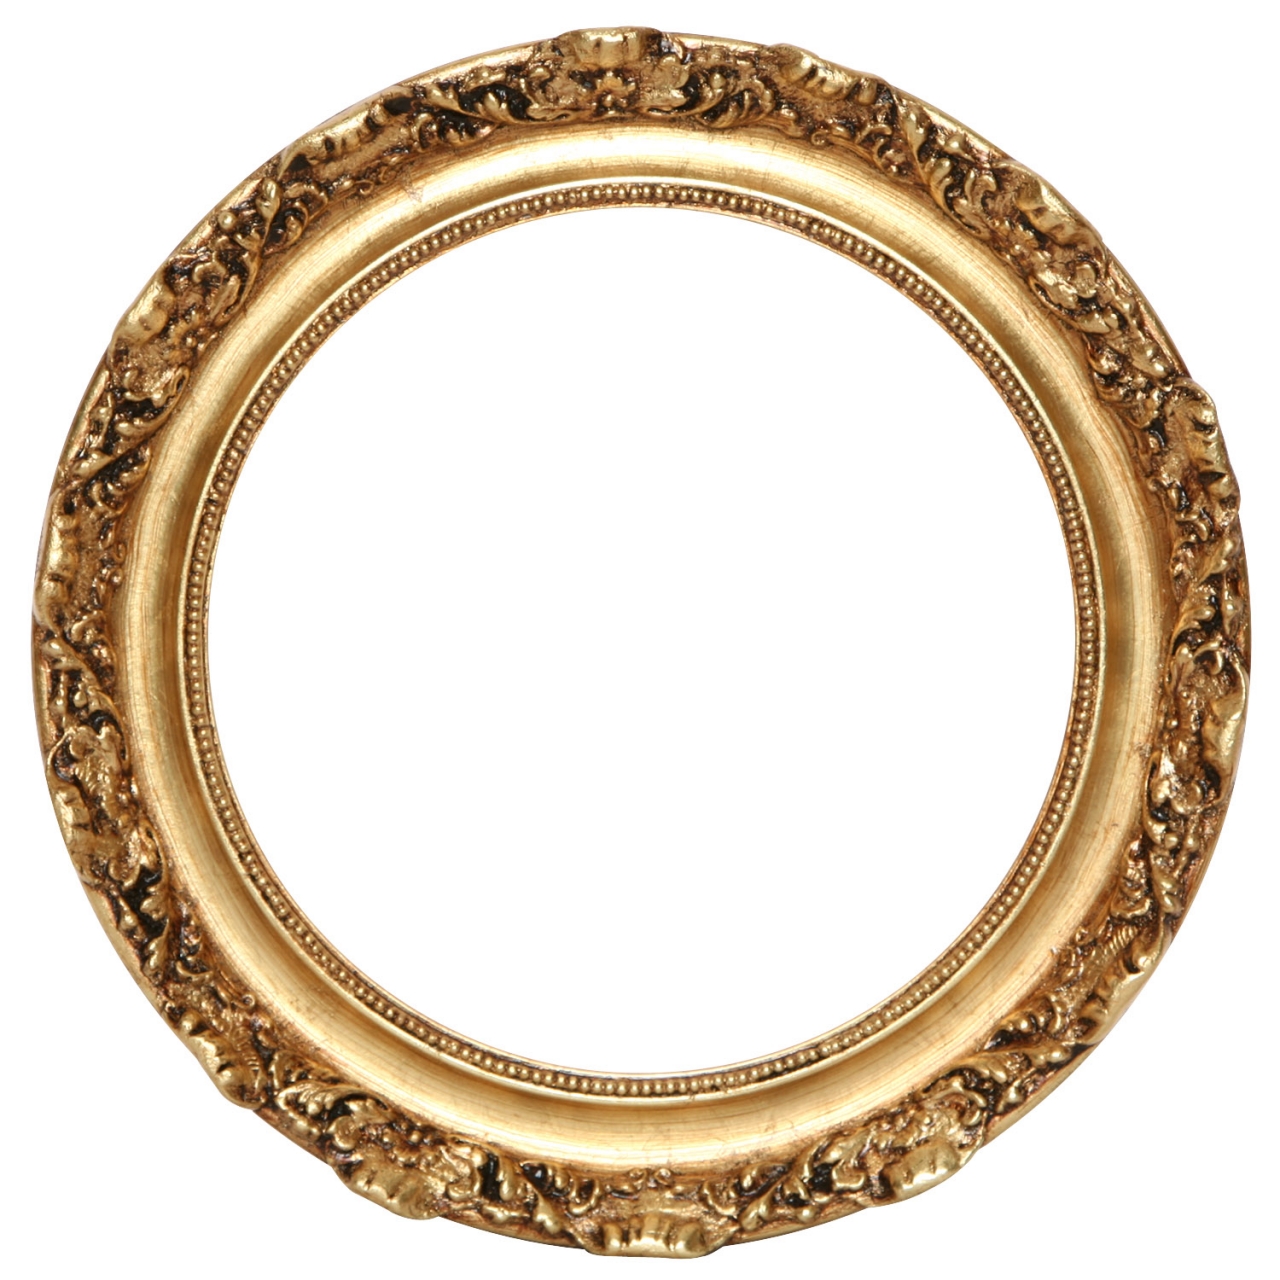 Gold Frame Clip Art - Free Clipart Images